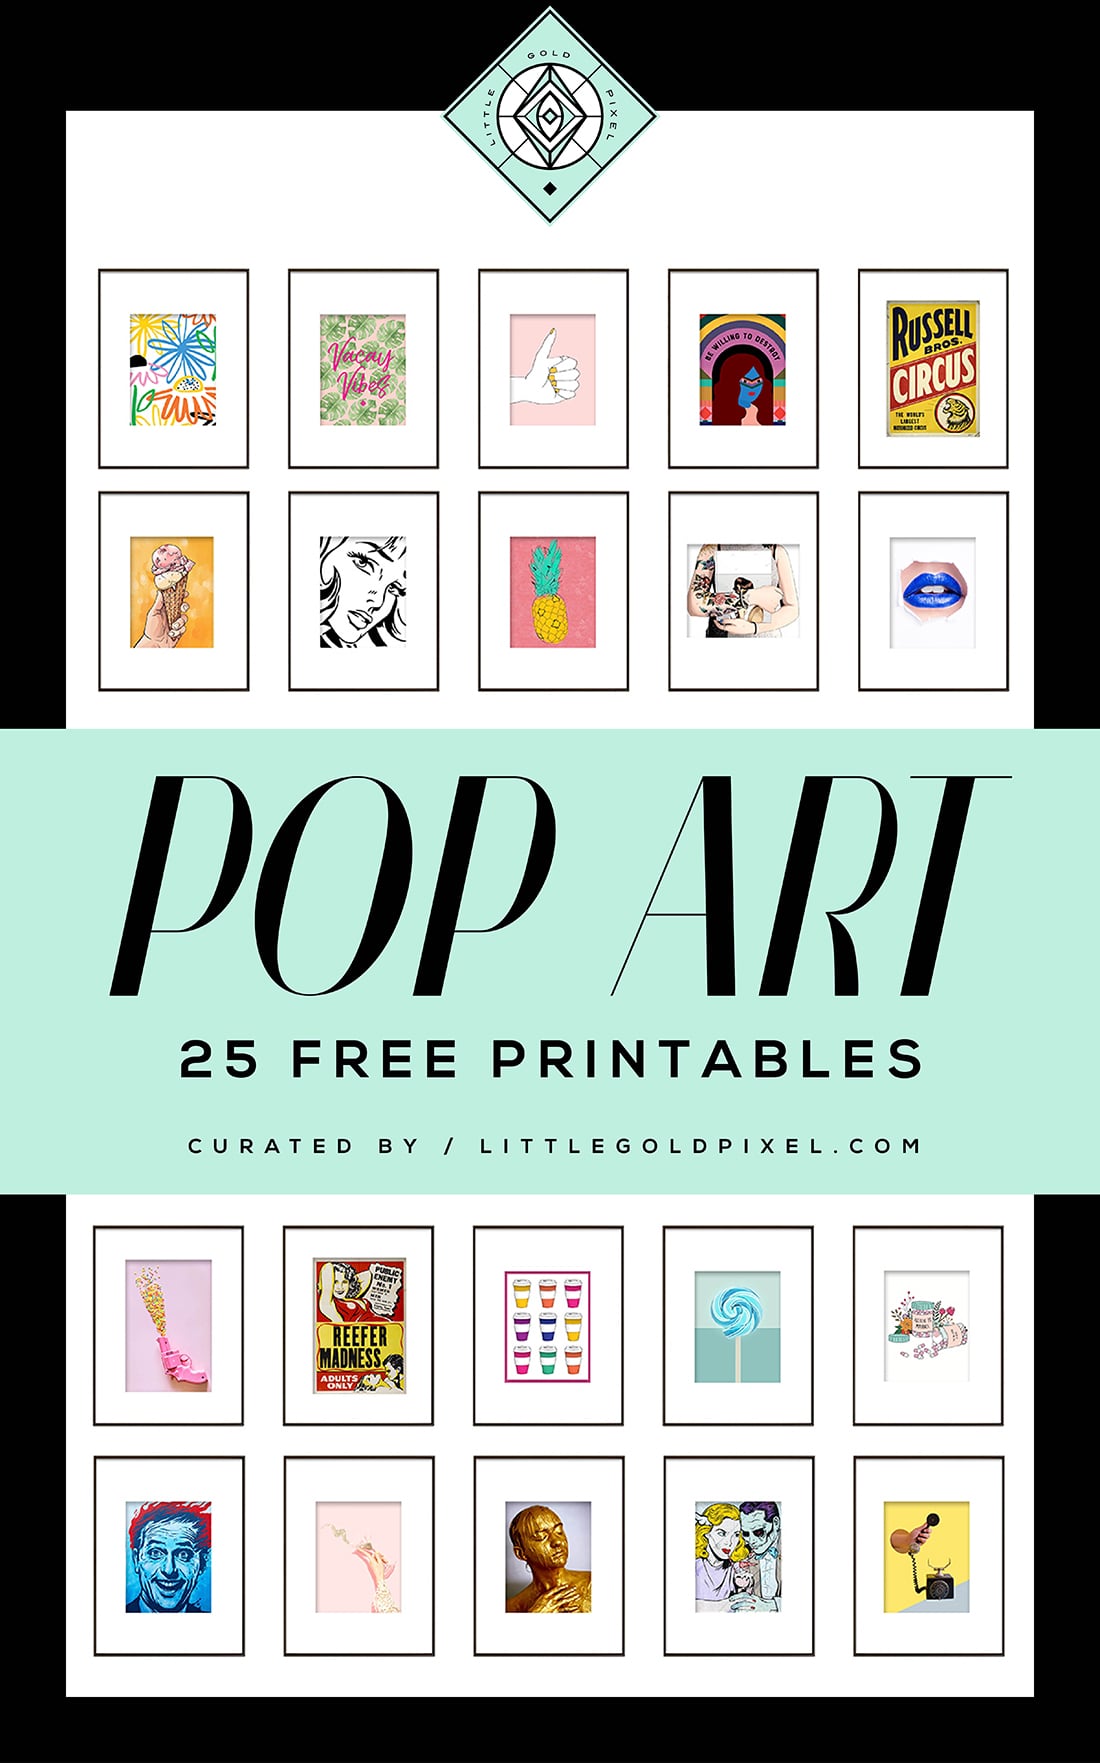 15 Free Gallery Wall Art Roundups to Bookmark • Little Gold Pixel • In which I share 15 free gallery wall art roundups that you can bookmark and share to create easy themed wall art throughout your home.